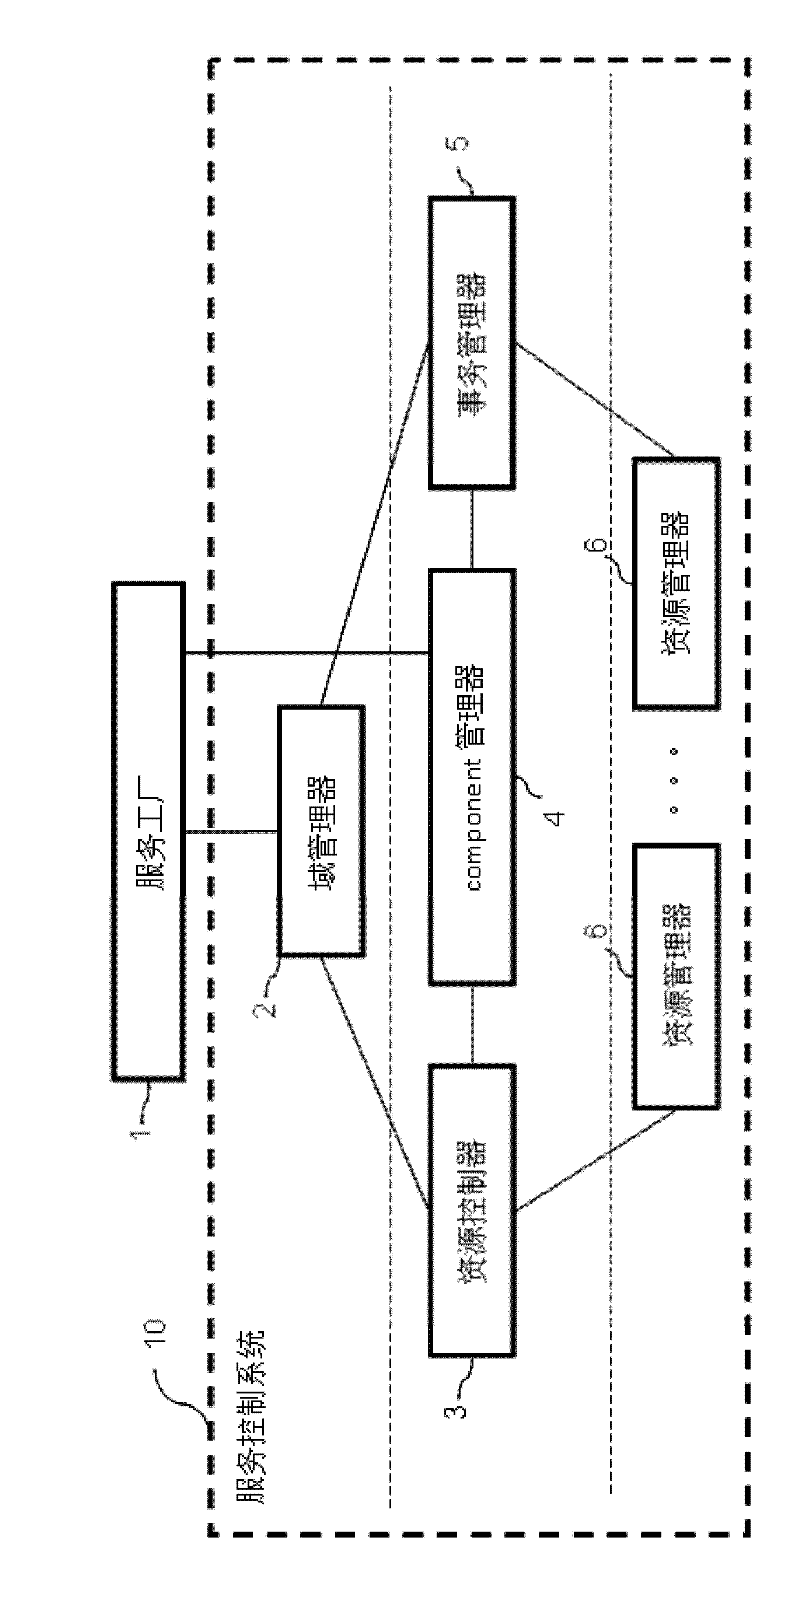 Transaction-based service control system and method